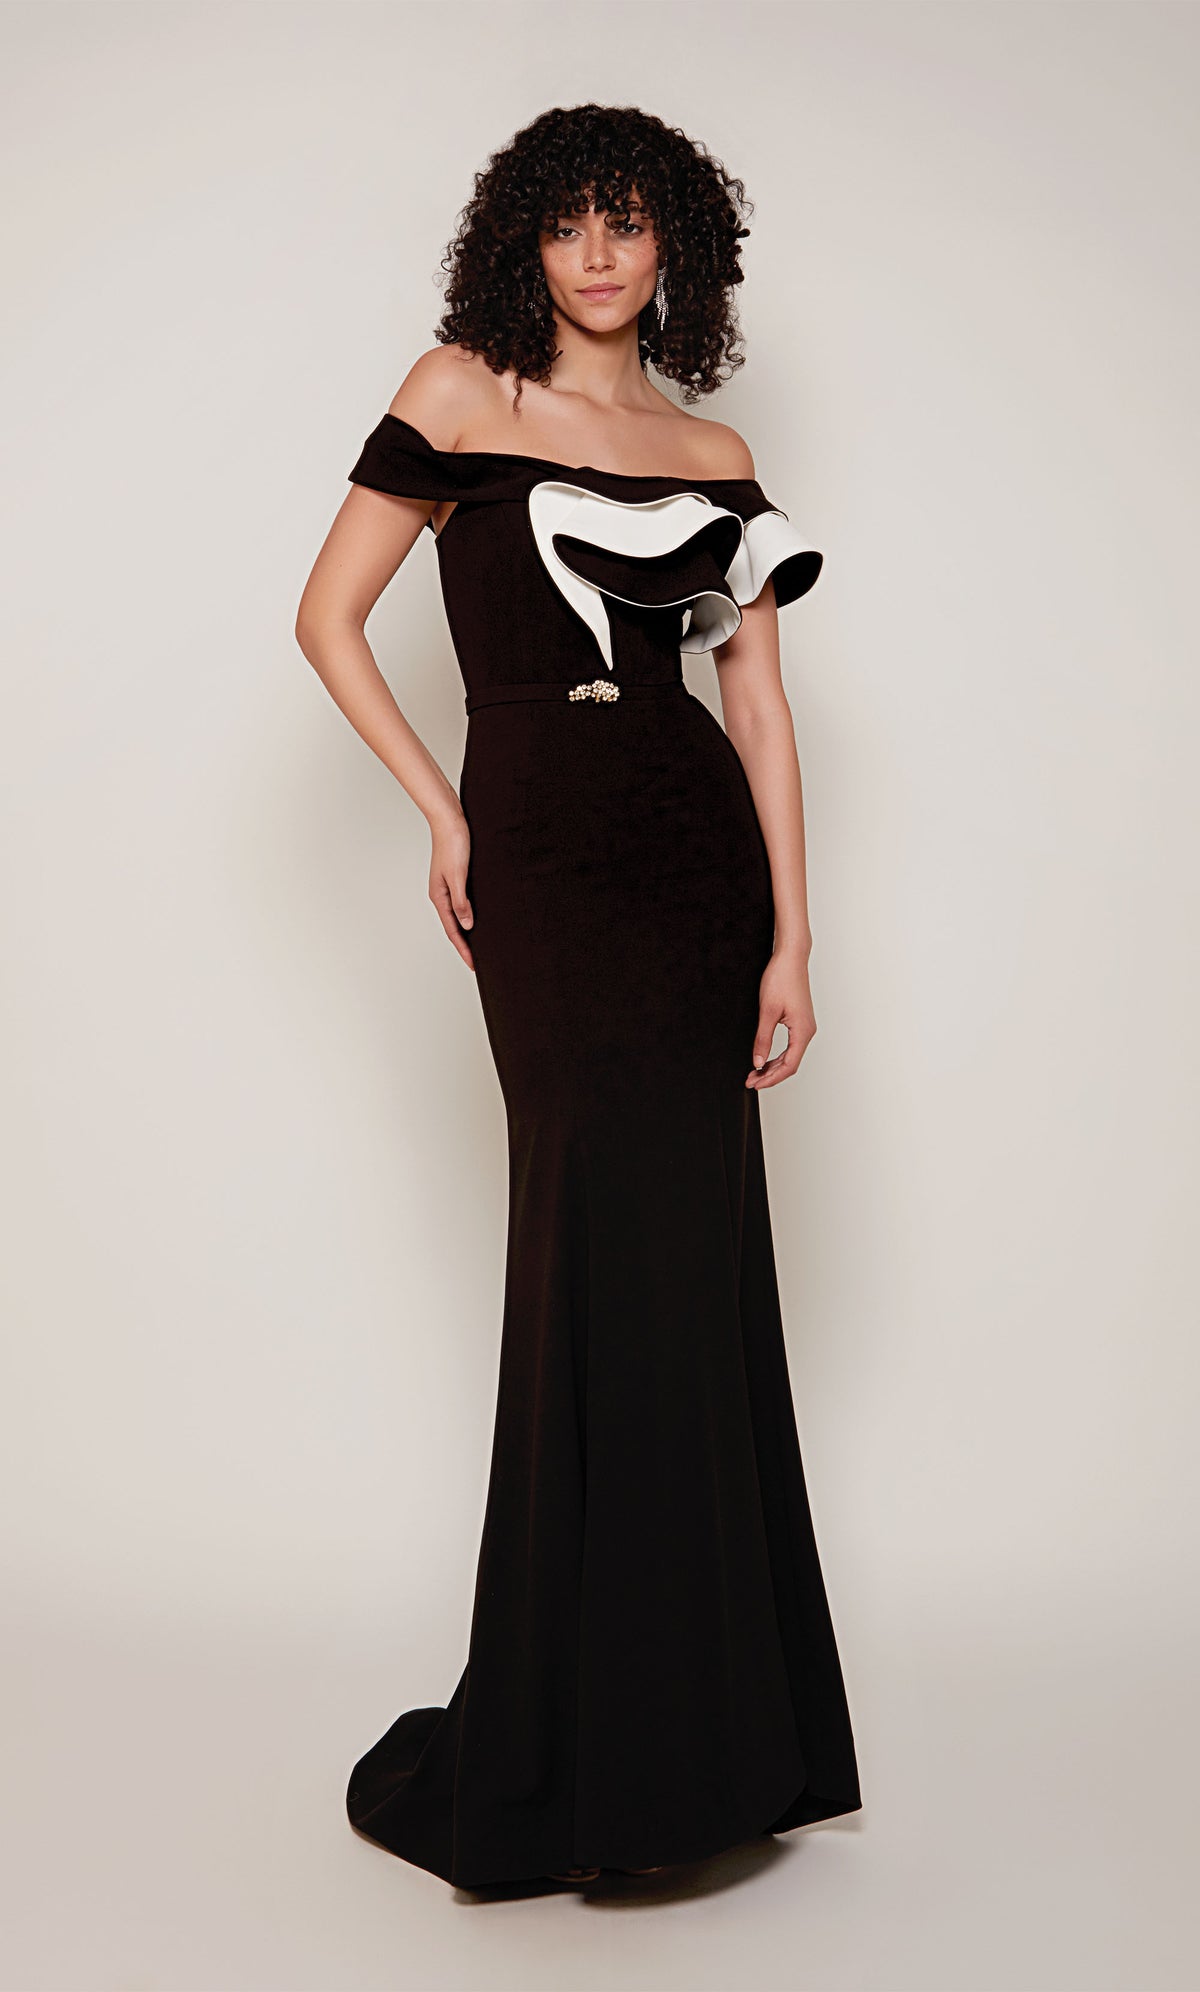 A black and white evening gown with an off-the-shoulder neckline and ruffle bodice. In addition, the dress has a faux belt at the waistline and a slight train.